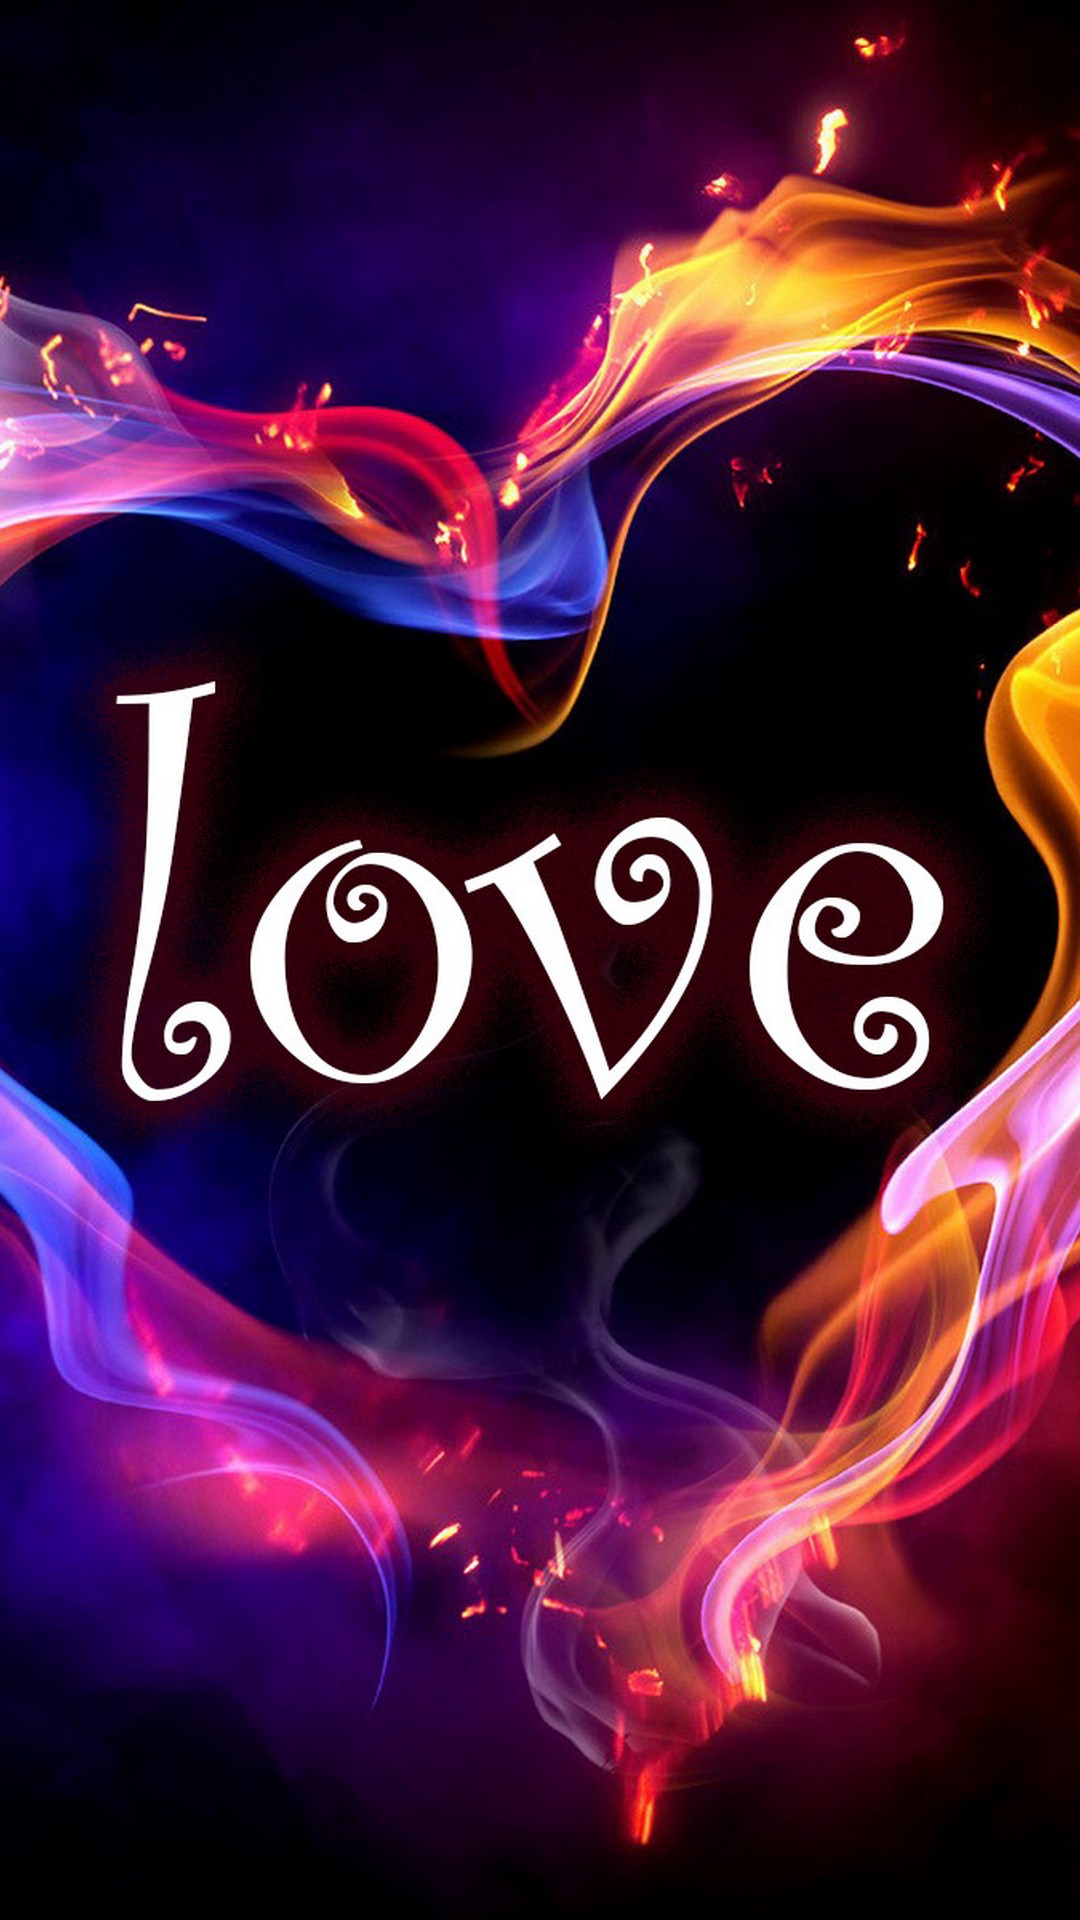 Love HD Wallpapers For Android - 2021 Android Wallpapers